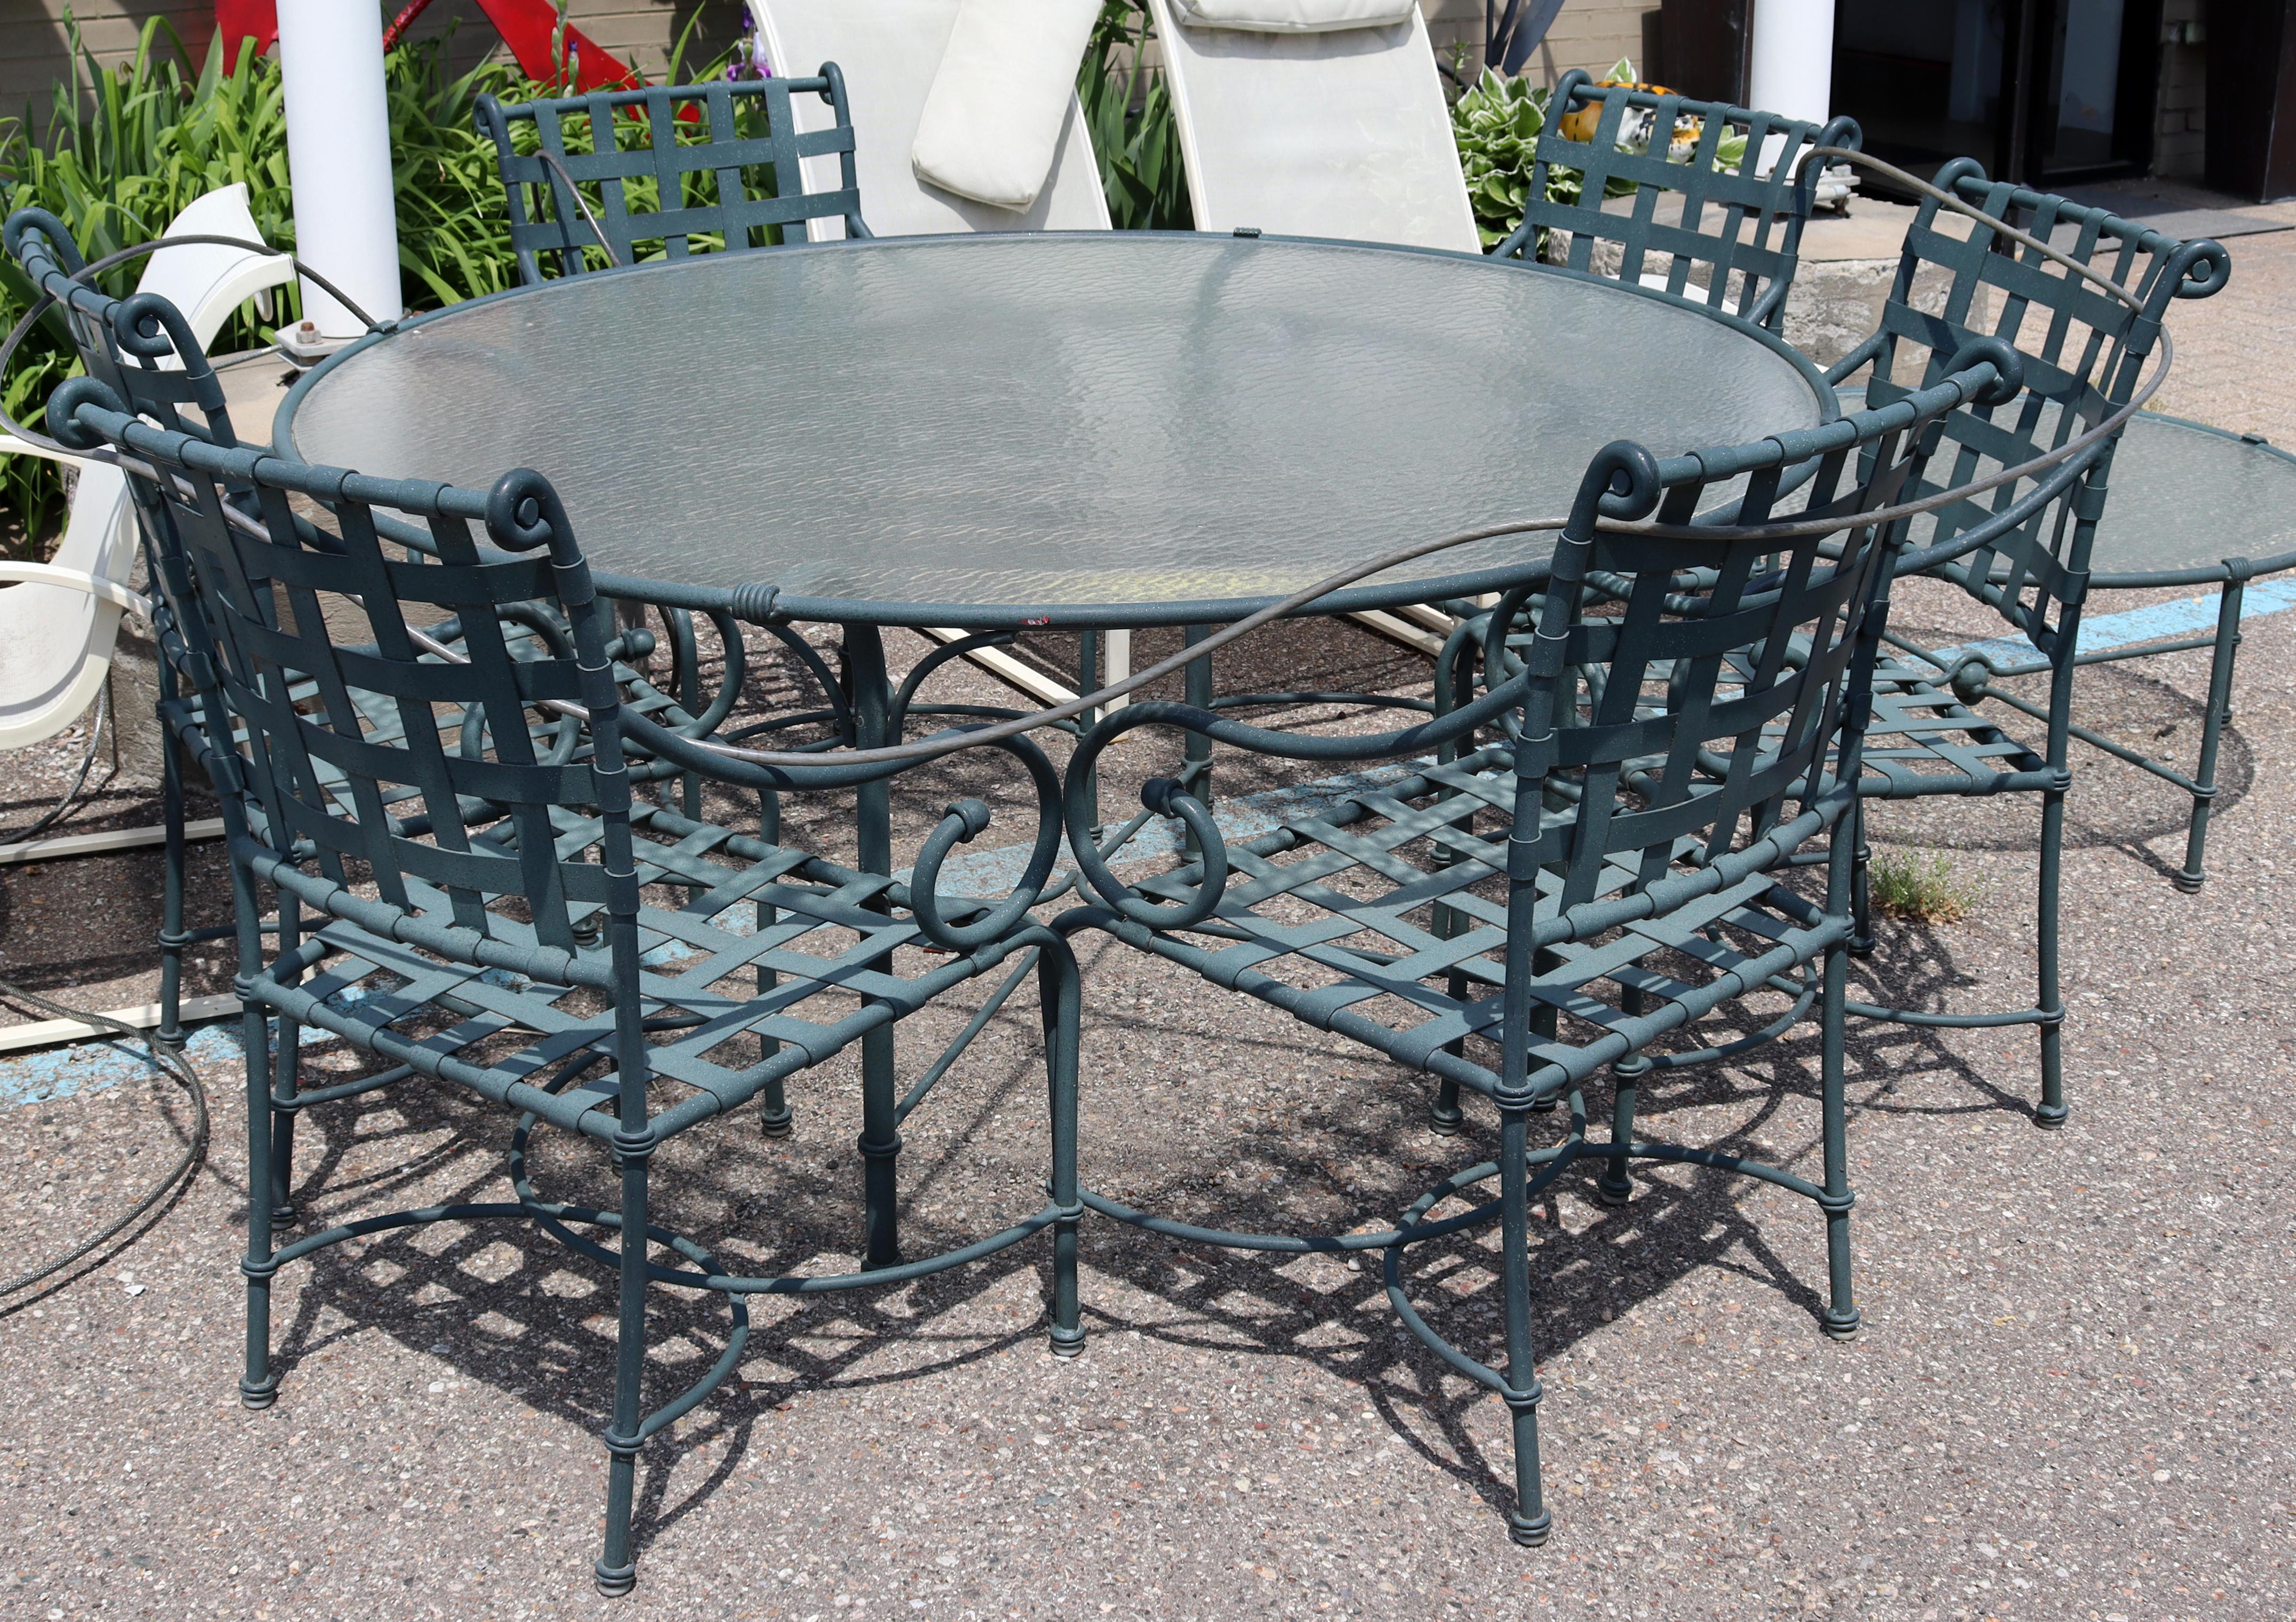 For your consideration is a phenomenal patio set, including a dining table, six dining chairs, a side or coffee table, and a pair of chaise lounges, by Brown Jordan, circa the 1980s. In excellent vintage condition. The dimensions of the dining